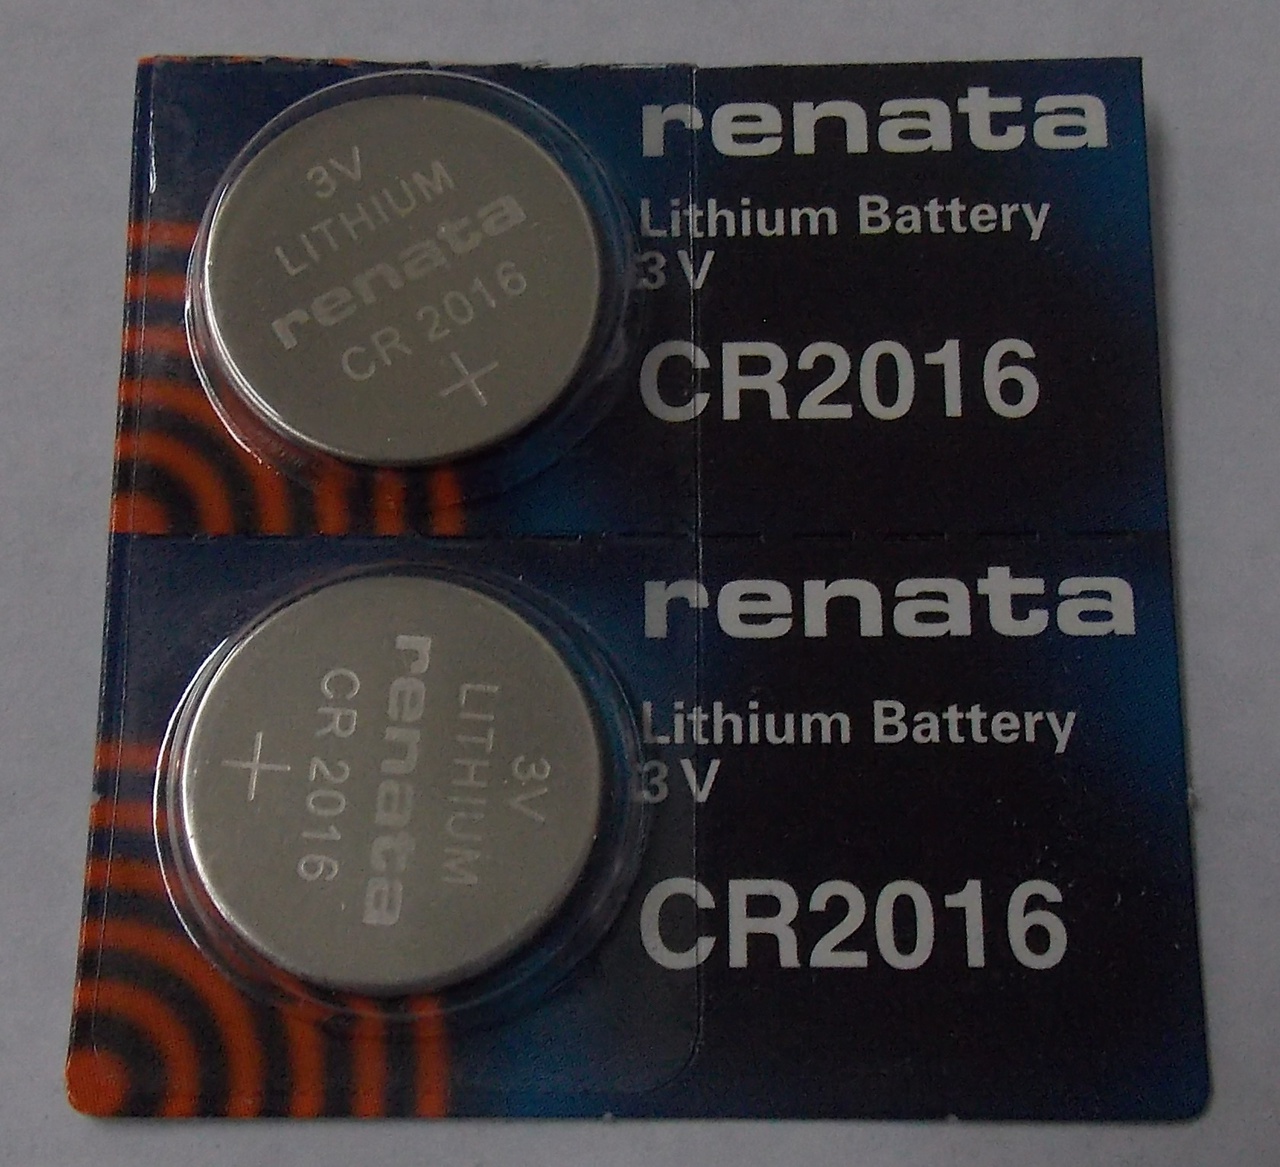 Renata CR2016 3V Lithium Coin Battery - 2 Pack + FREE SHIPPING!